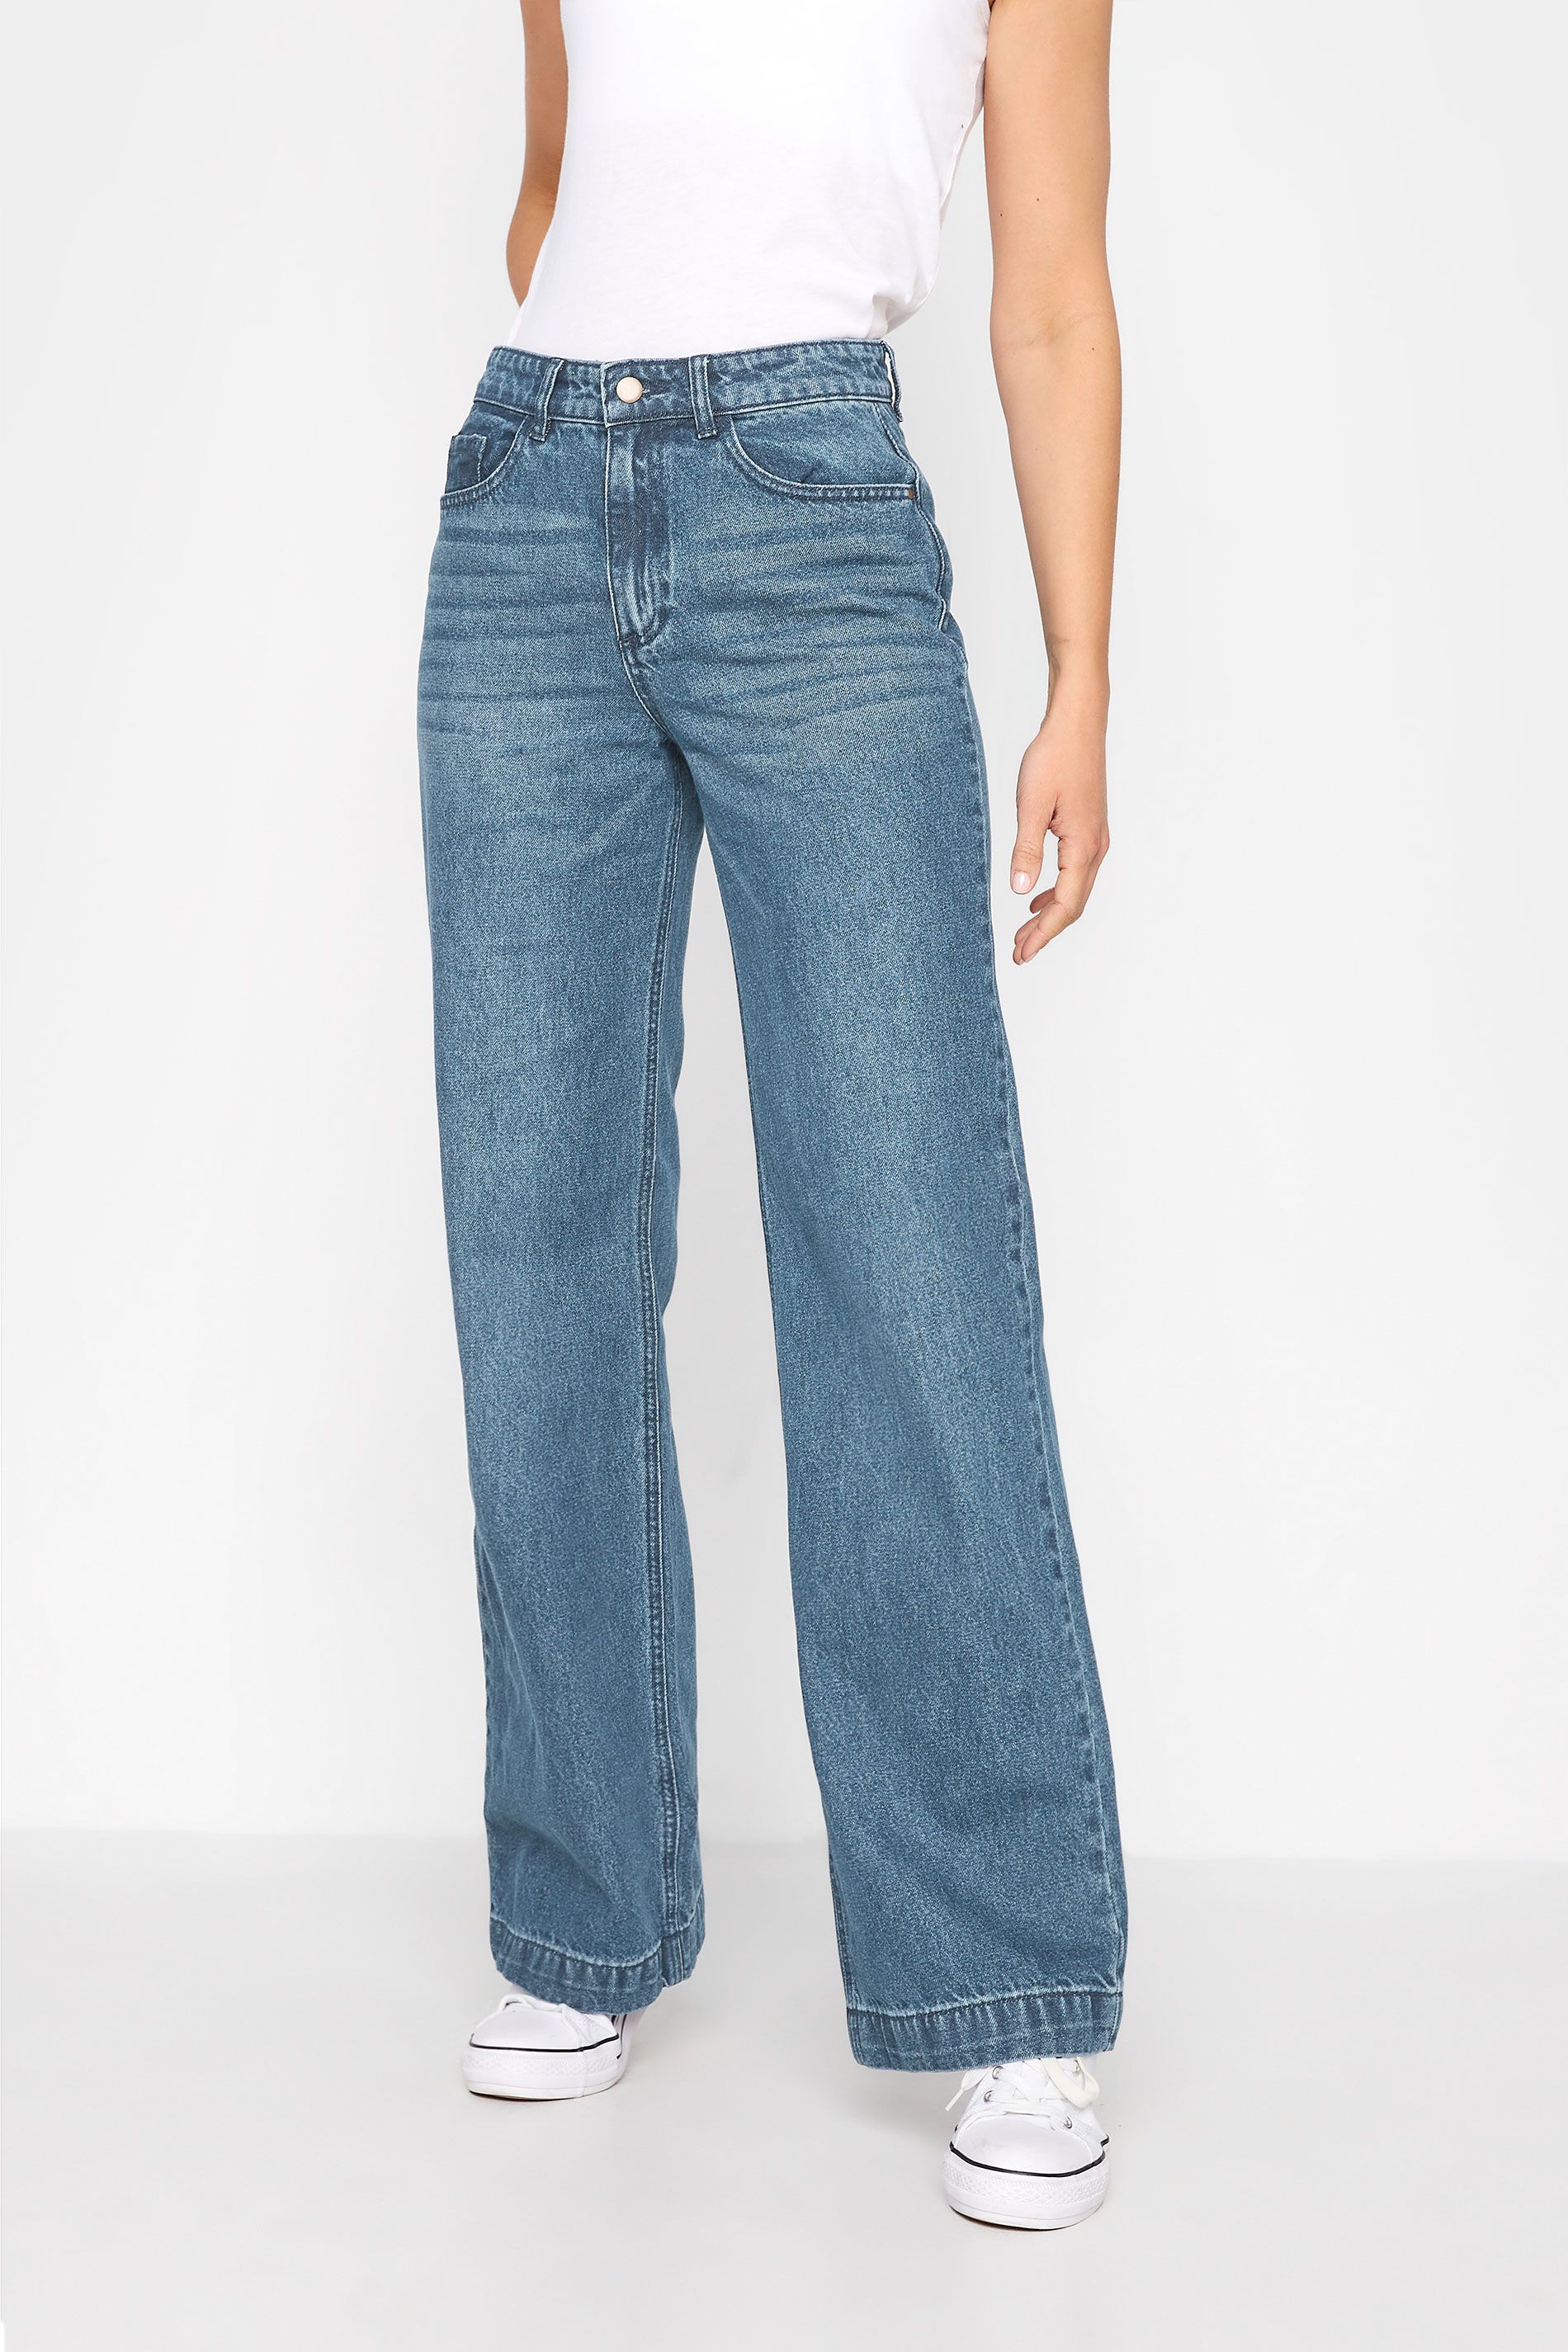 LTS MADE FOR GOOD Tall Mid Blue BEA Wide Leg Jeans | Long Tall Sally